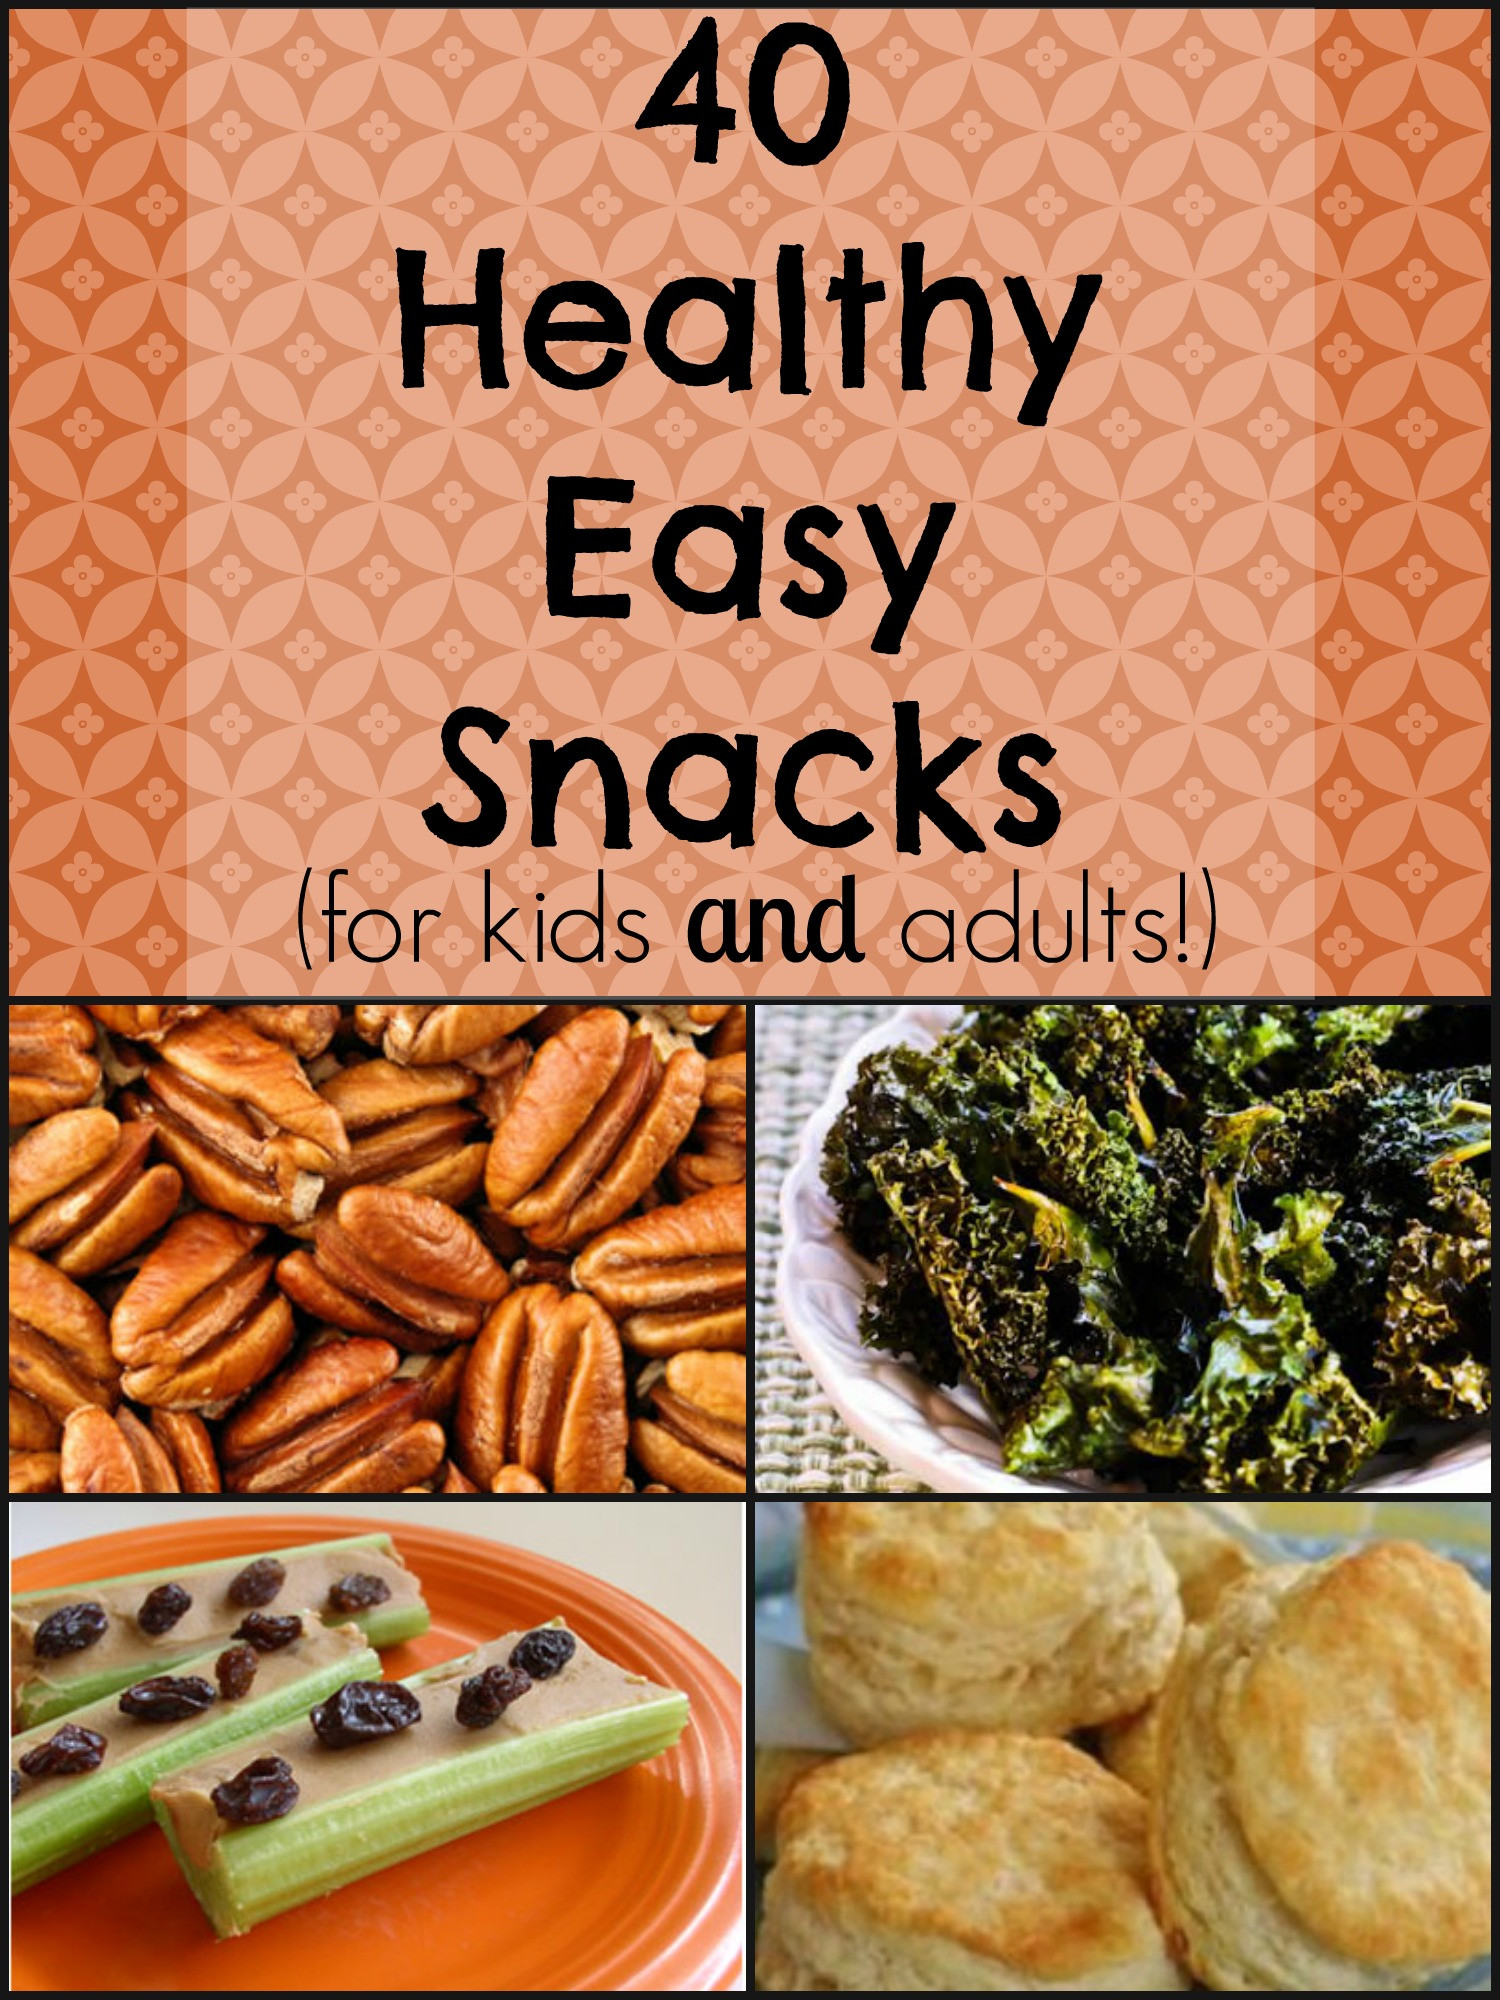 Homemade Healthy Snacks
 40 Healthy Easy Snacks for kids and adults 